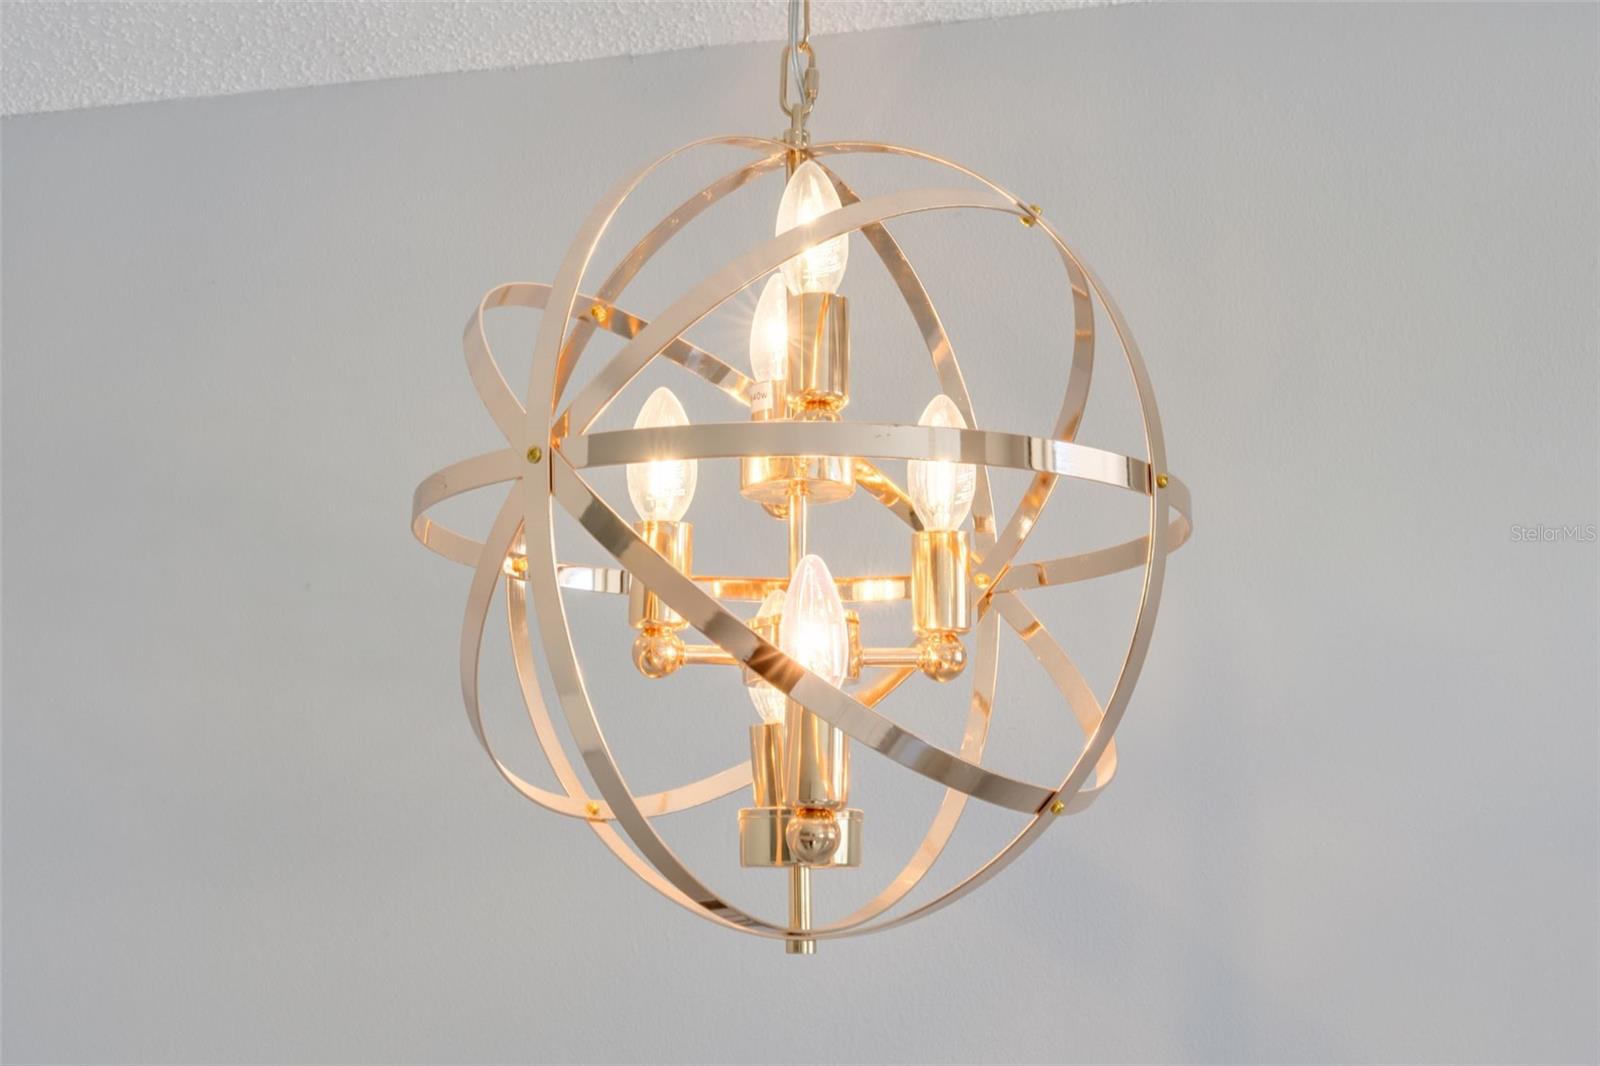 lovely rose-gold accent fixture